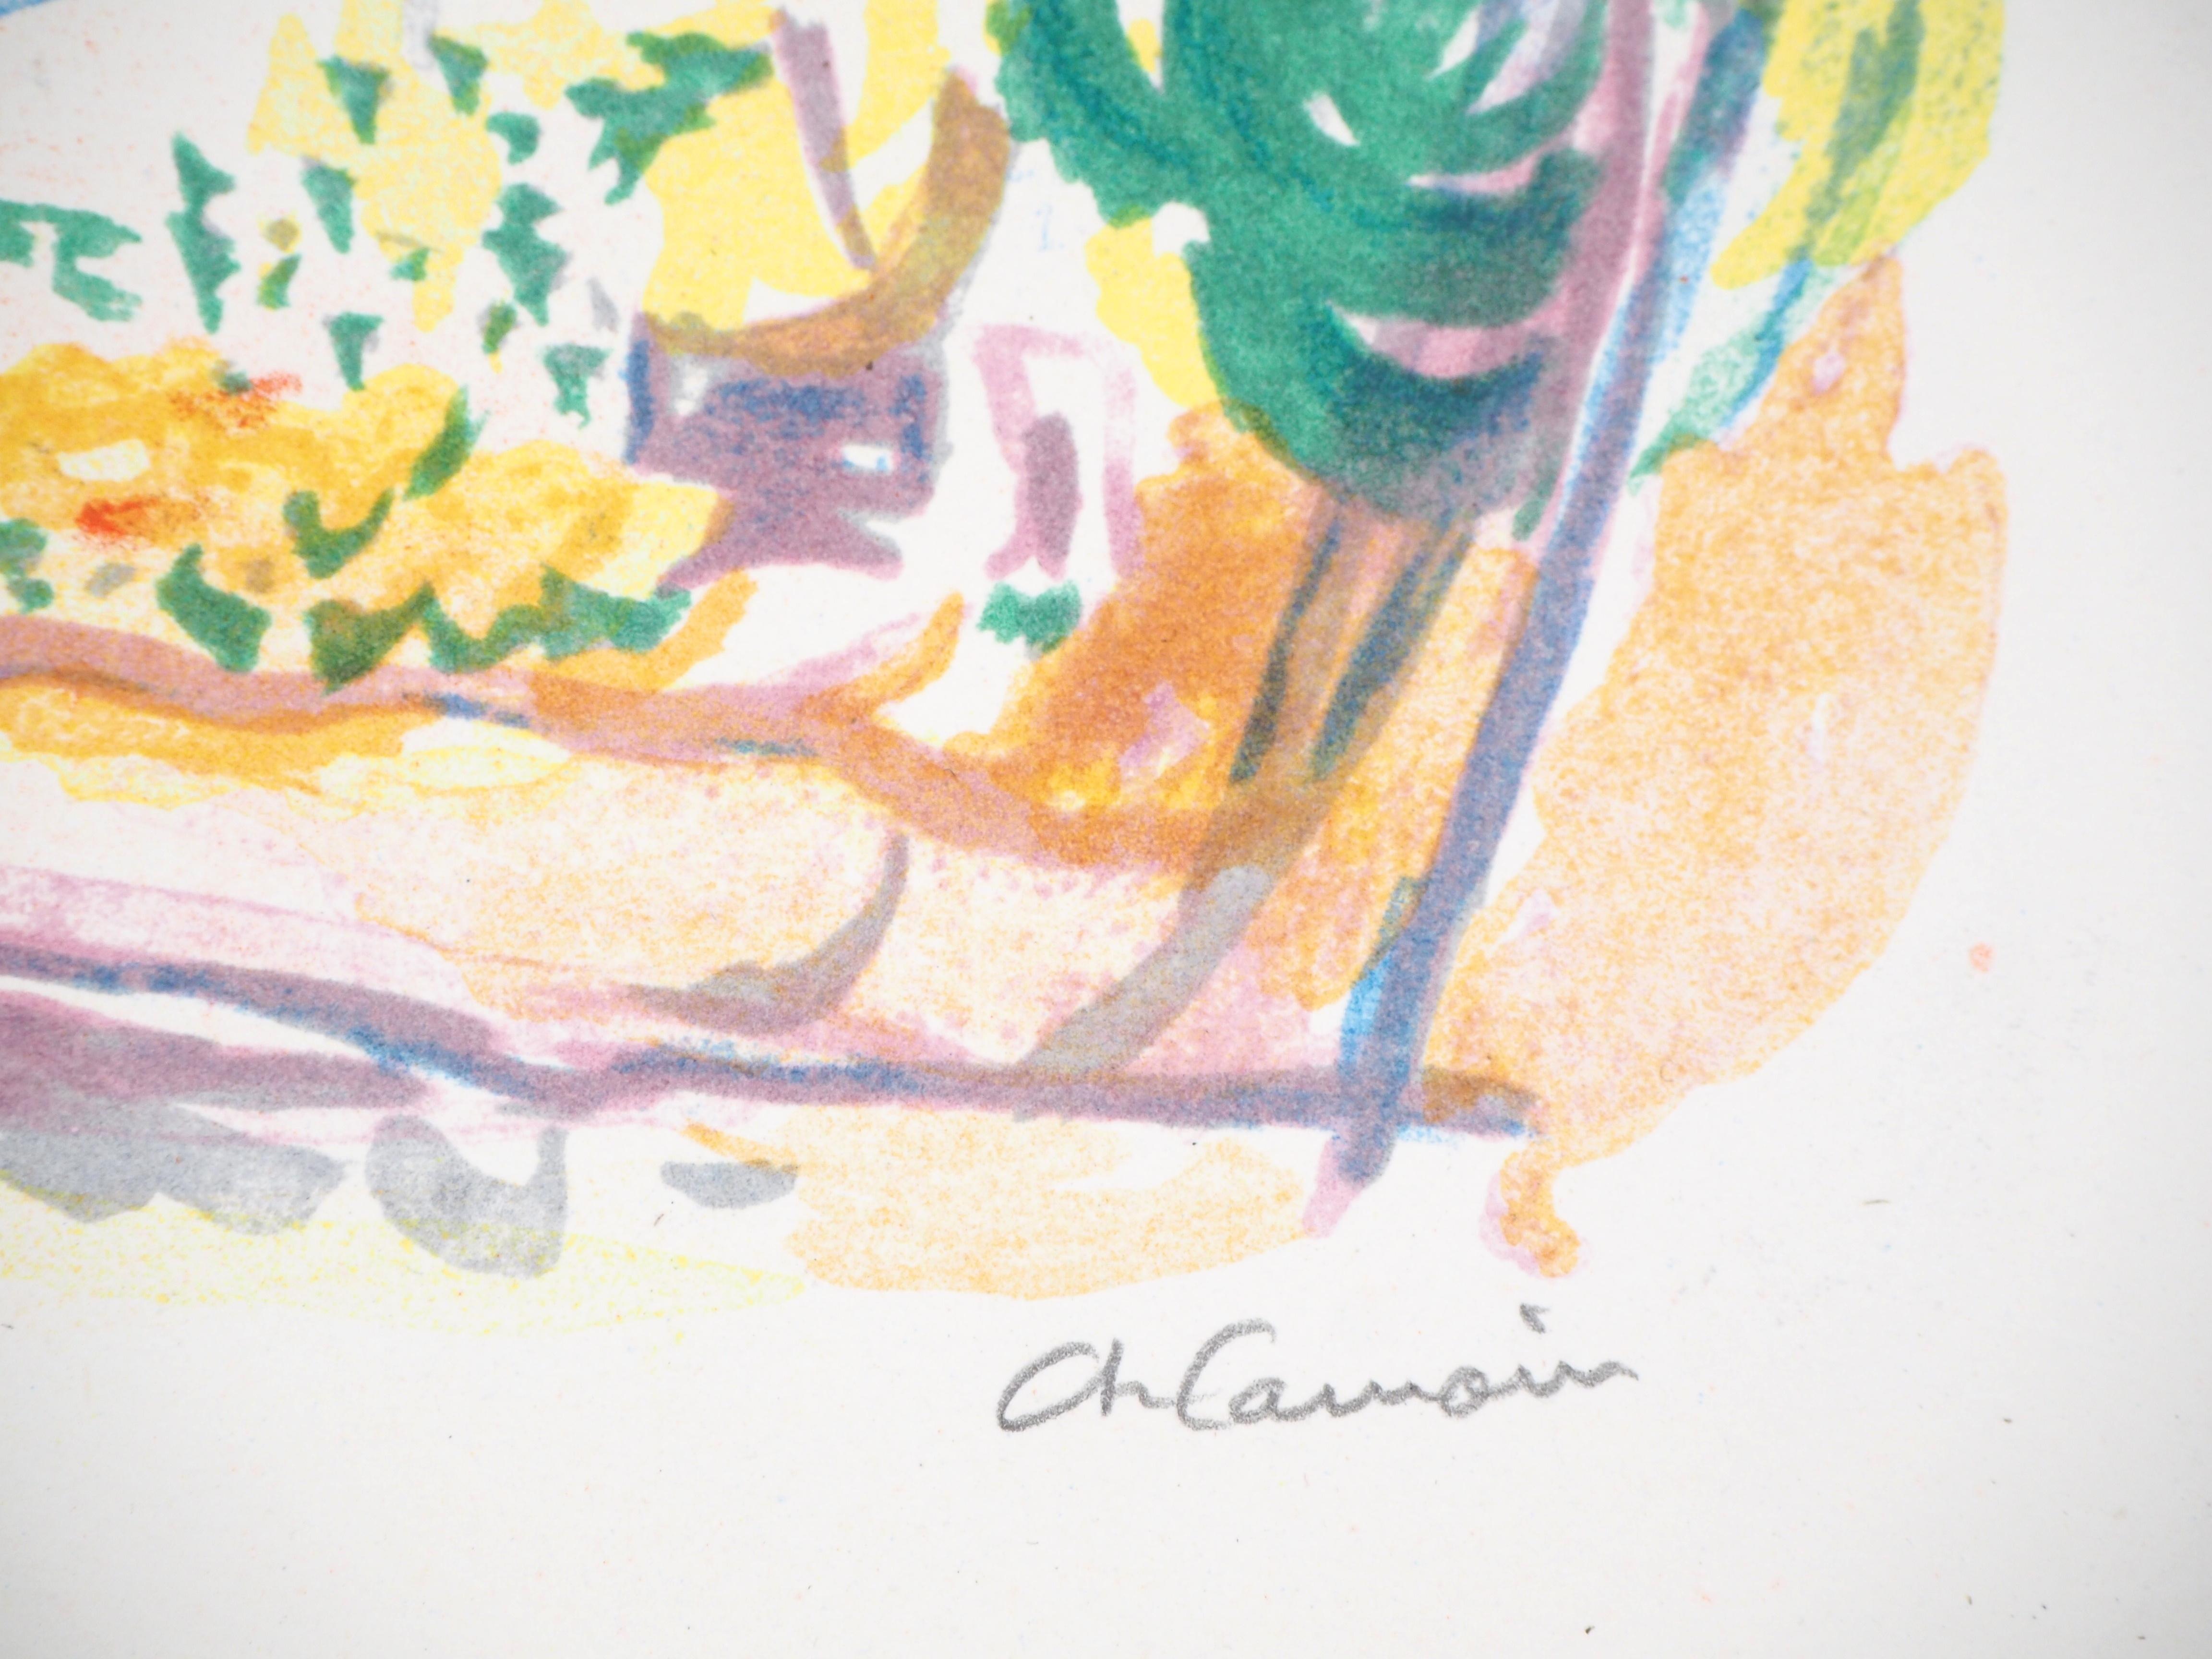 Sea Side - Original Lithograph - Signed - Print by Charles Camoin